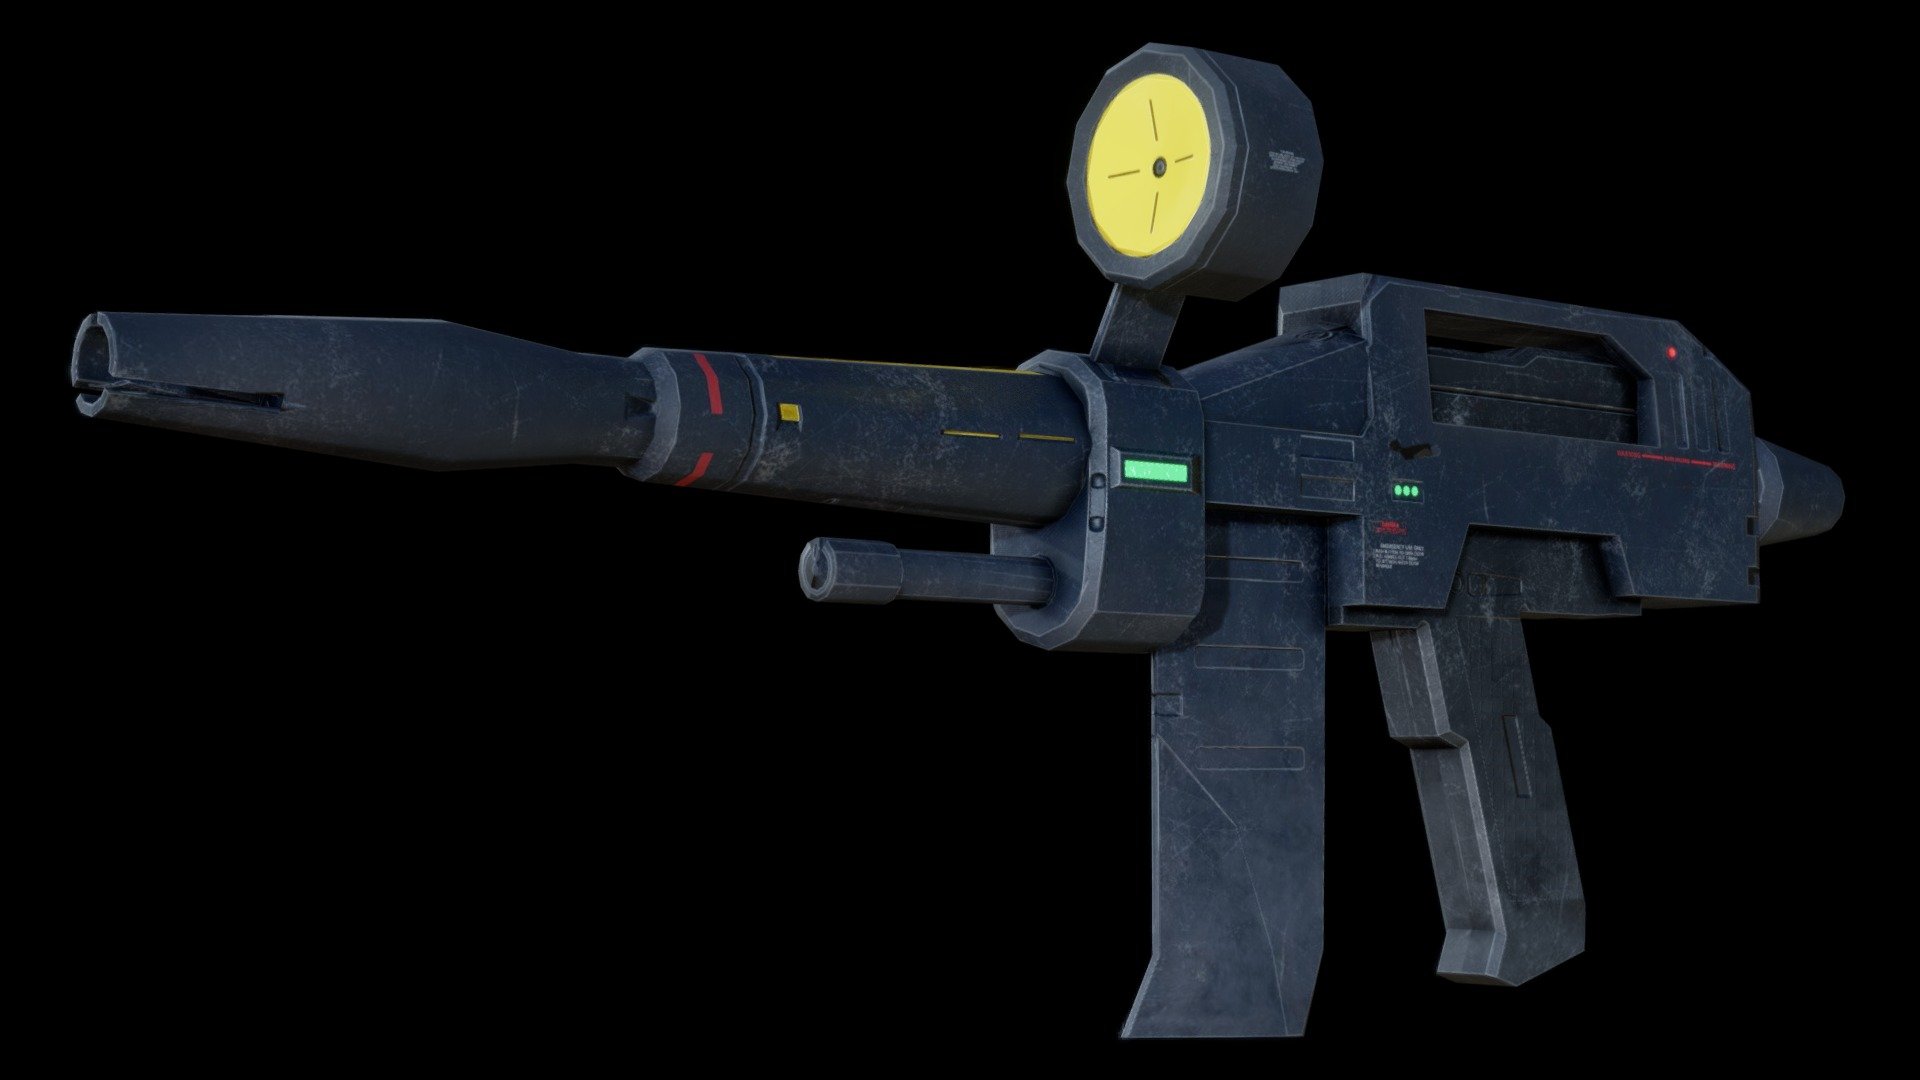 This model was made for One Year War mod of Hearts of Iron IV.

Our Mod Steam Home Page

https://steamcommunity.com/sharedfiles/filedetails/?id=2064985570 - EFS Gundam Beam Rifle - 3D model by One Year War Mod (@hoi4oneyearwar) 3d model